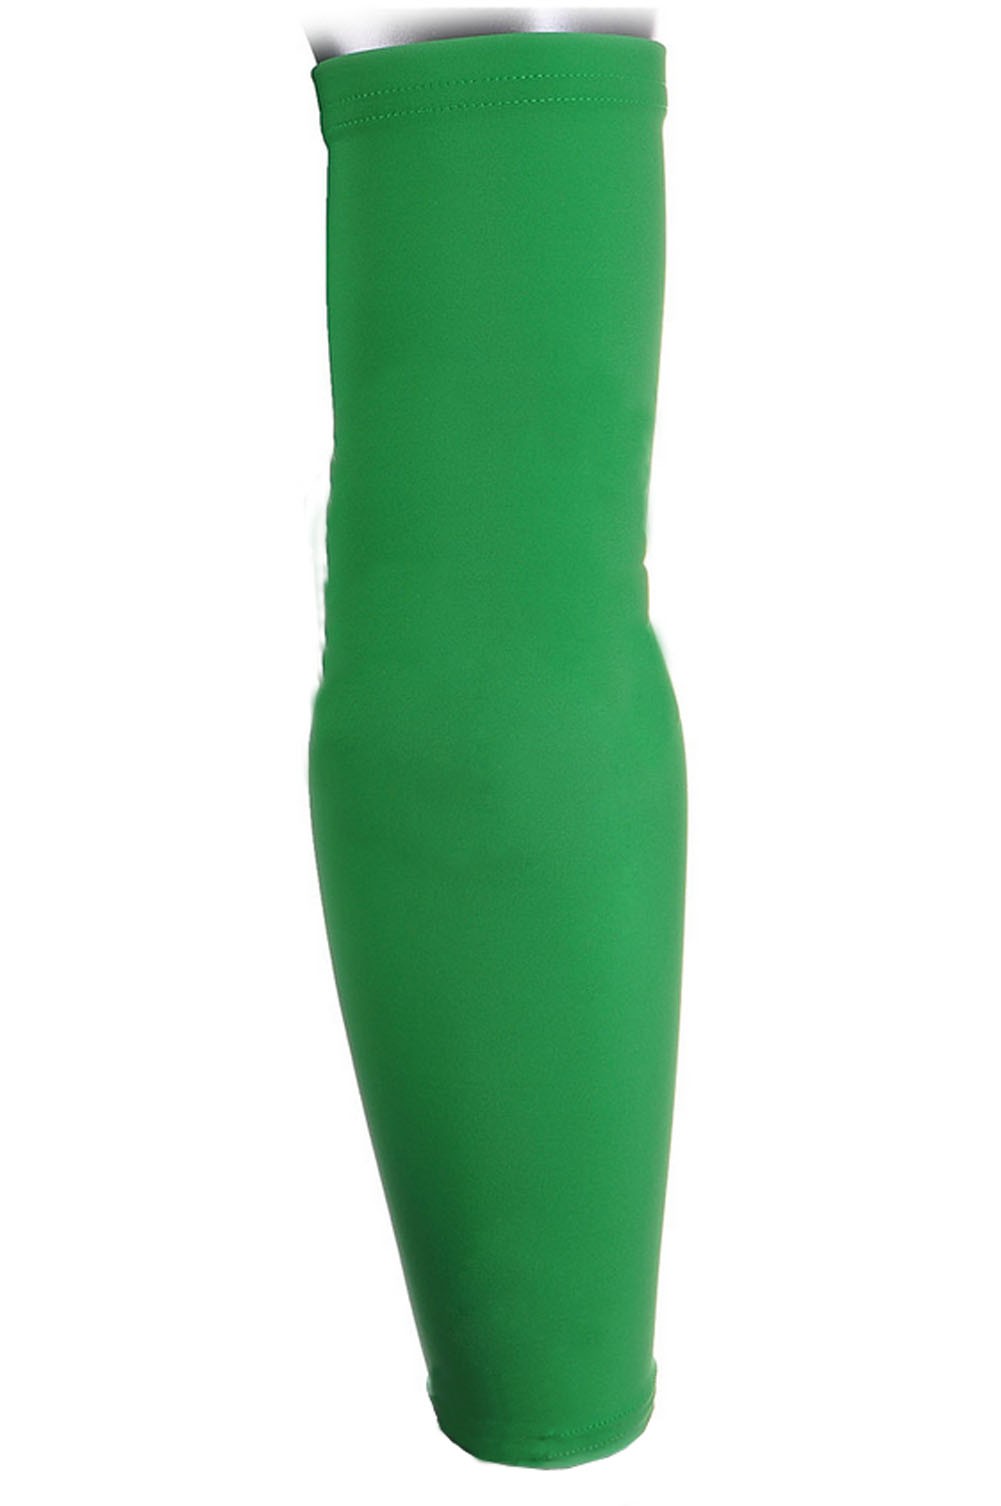 [GREEN] Men,Women & Youth Compression Basketball Shooter Sleeve, One Size